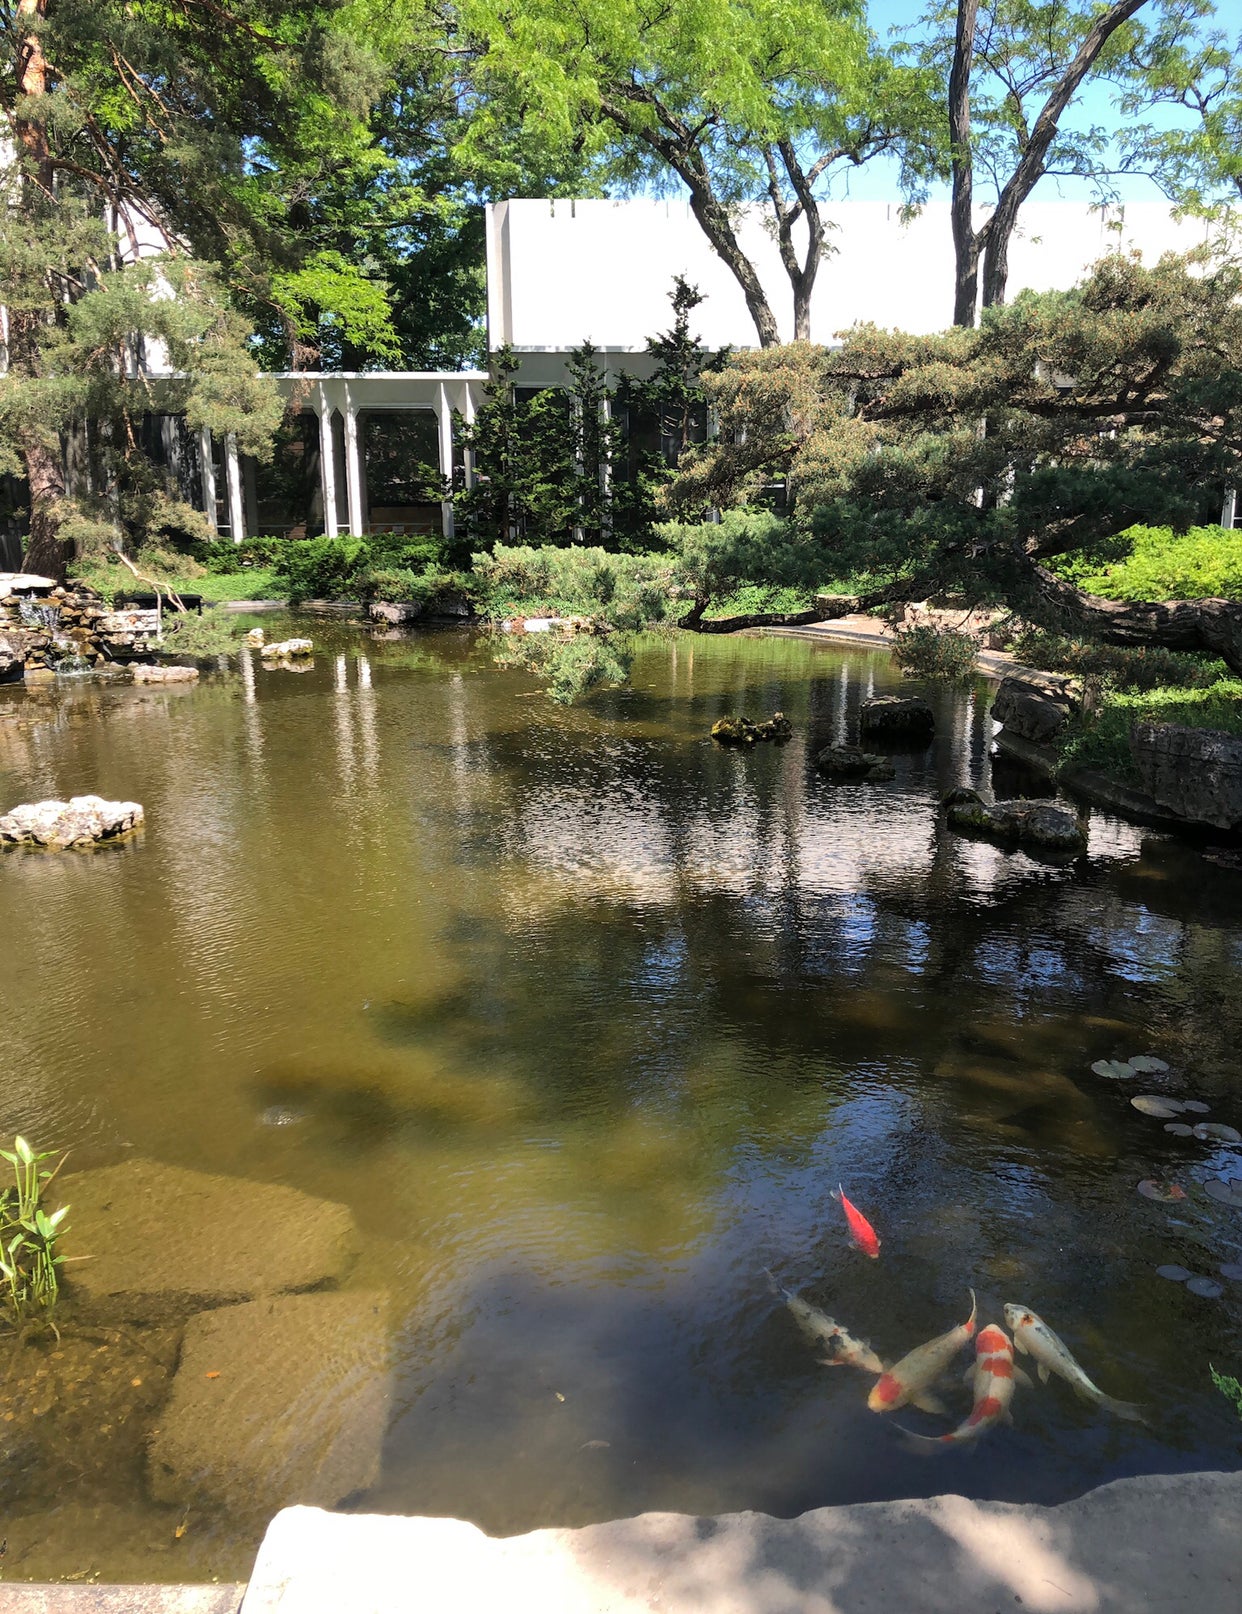 A photo of the main koi pond at Oberlin with 5 koi fish in view.